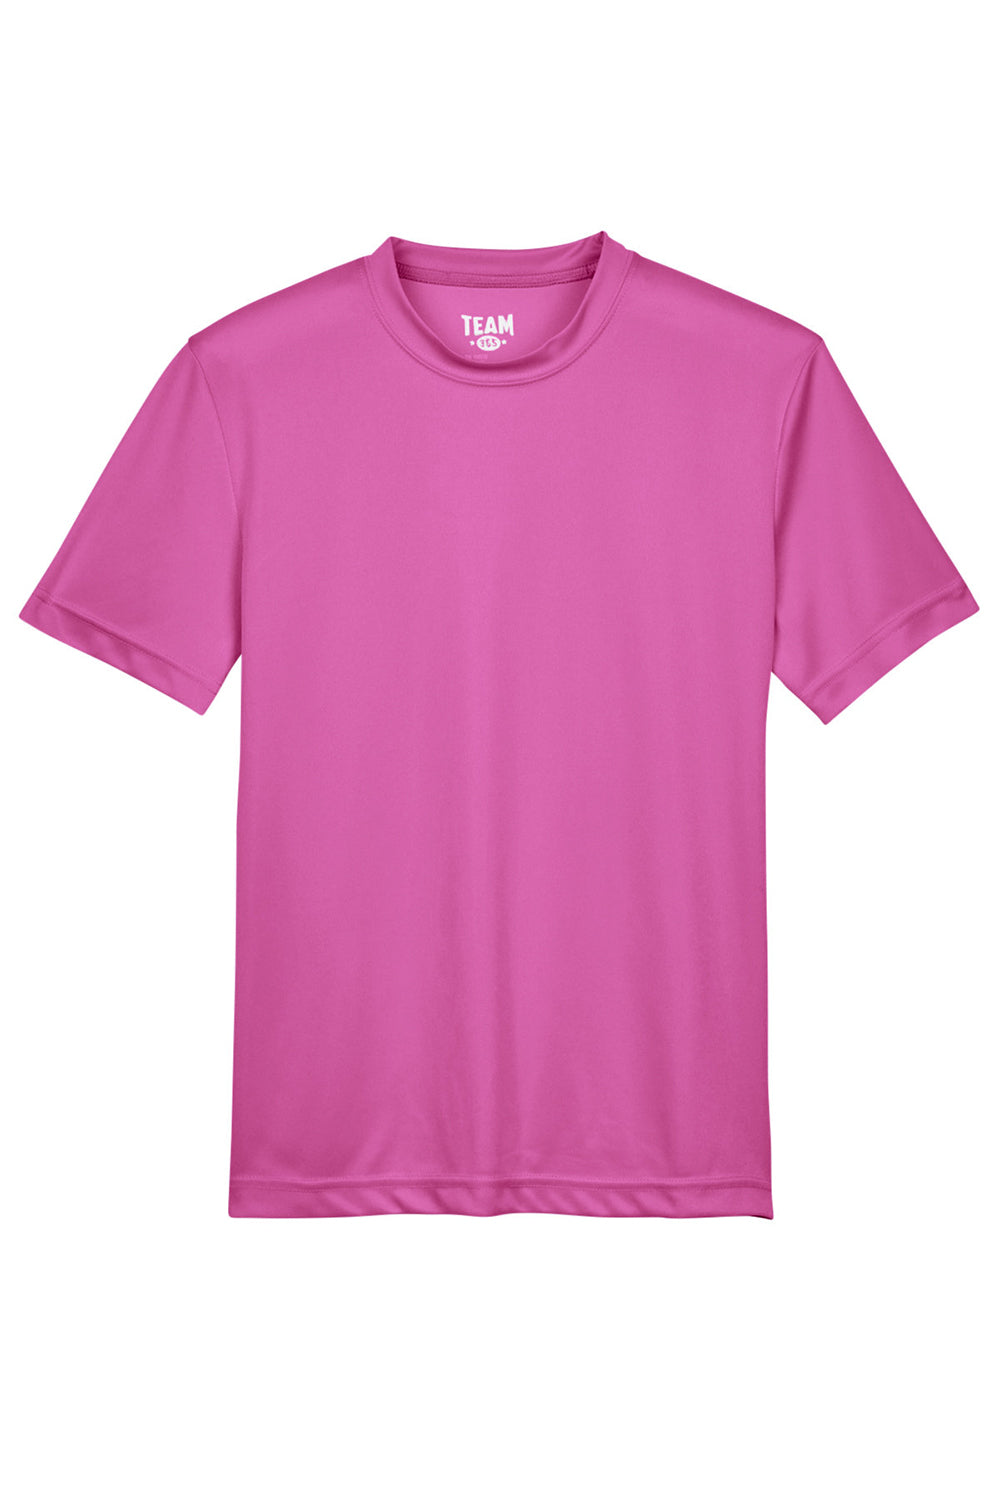 Team 365 TT11Y Youth Zone Performance Moisture Wicking Short Sleeve Crewneck T-Shirt Charity Pink Flat Front